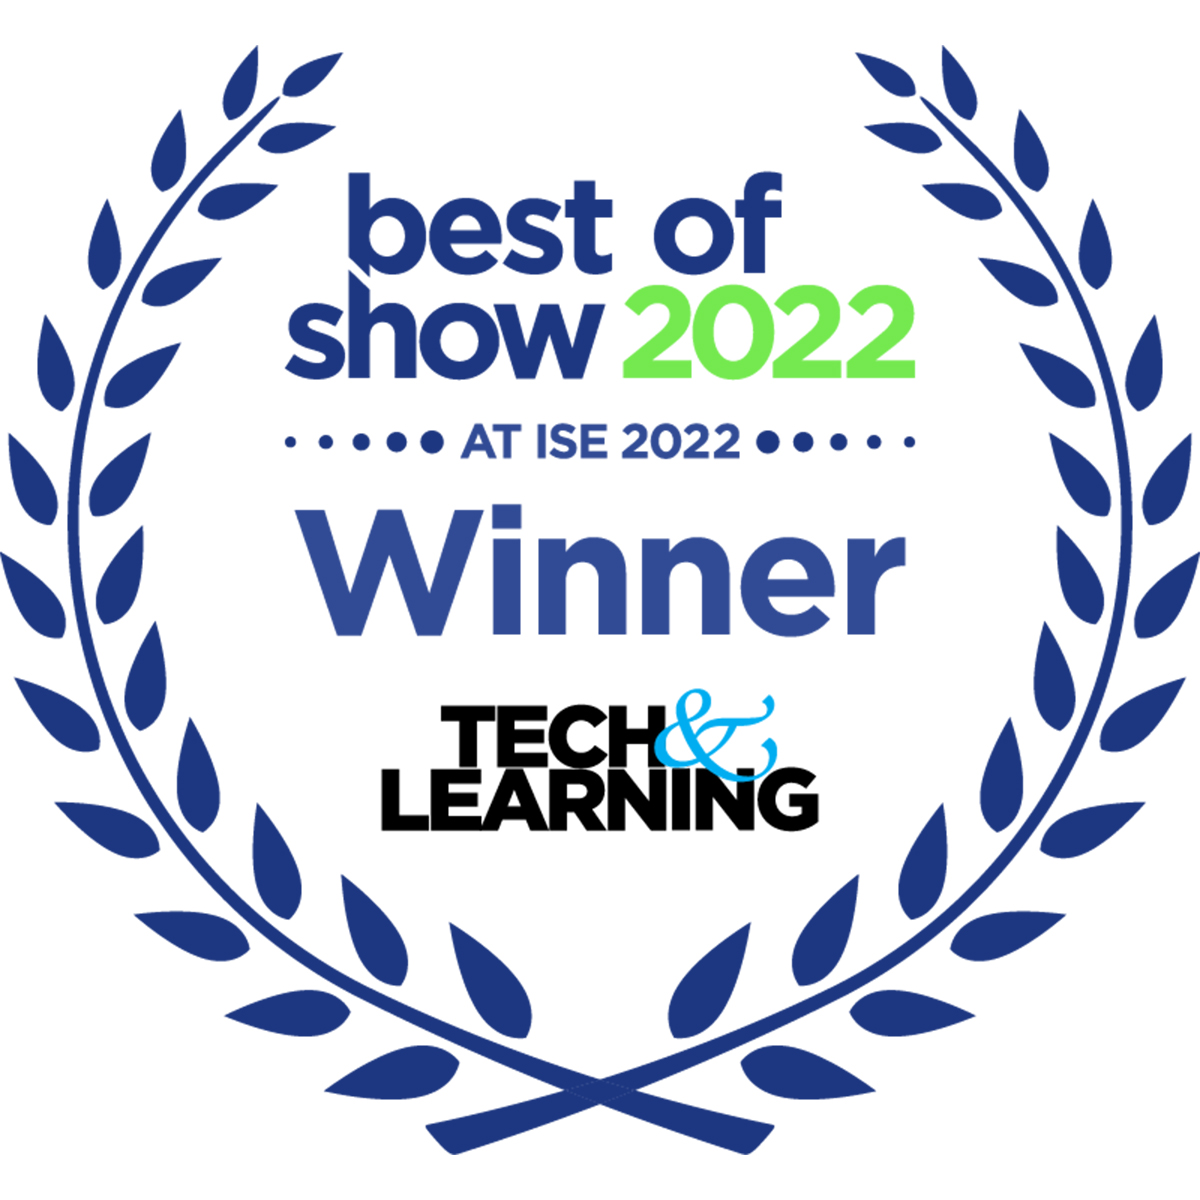 Tech & Learning “Best of Show” at ISE